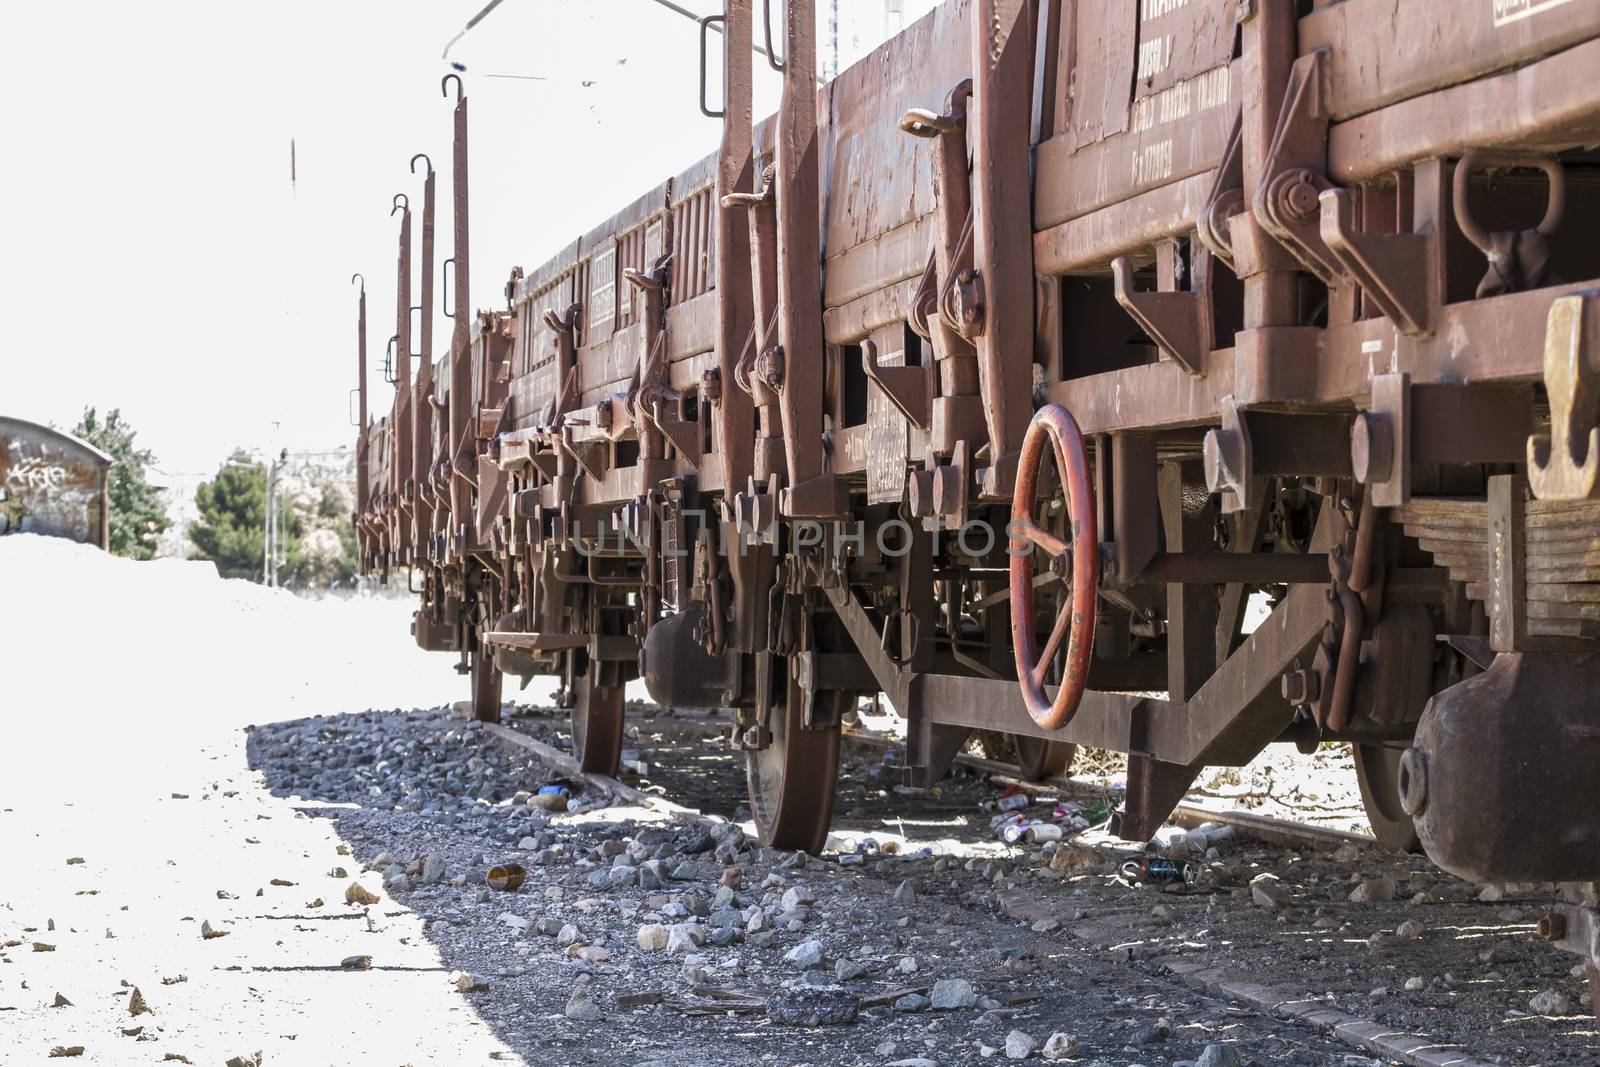 old freight train, metal machinery details by FernandoCortes